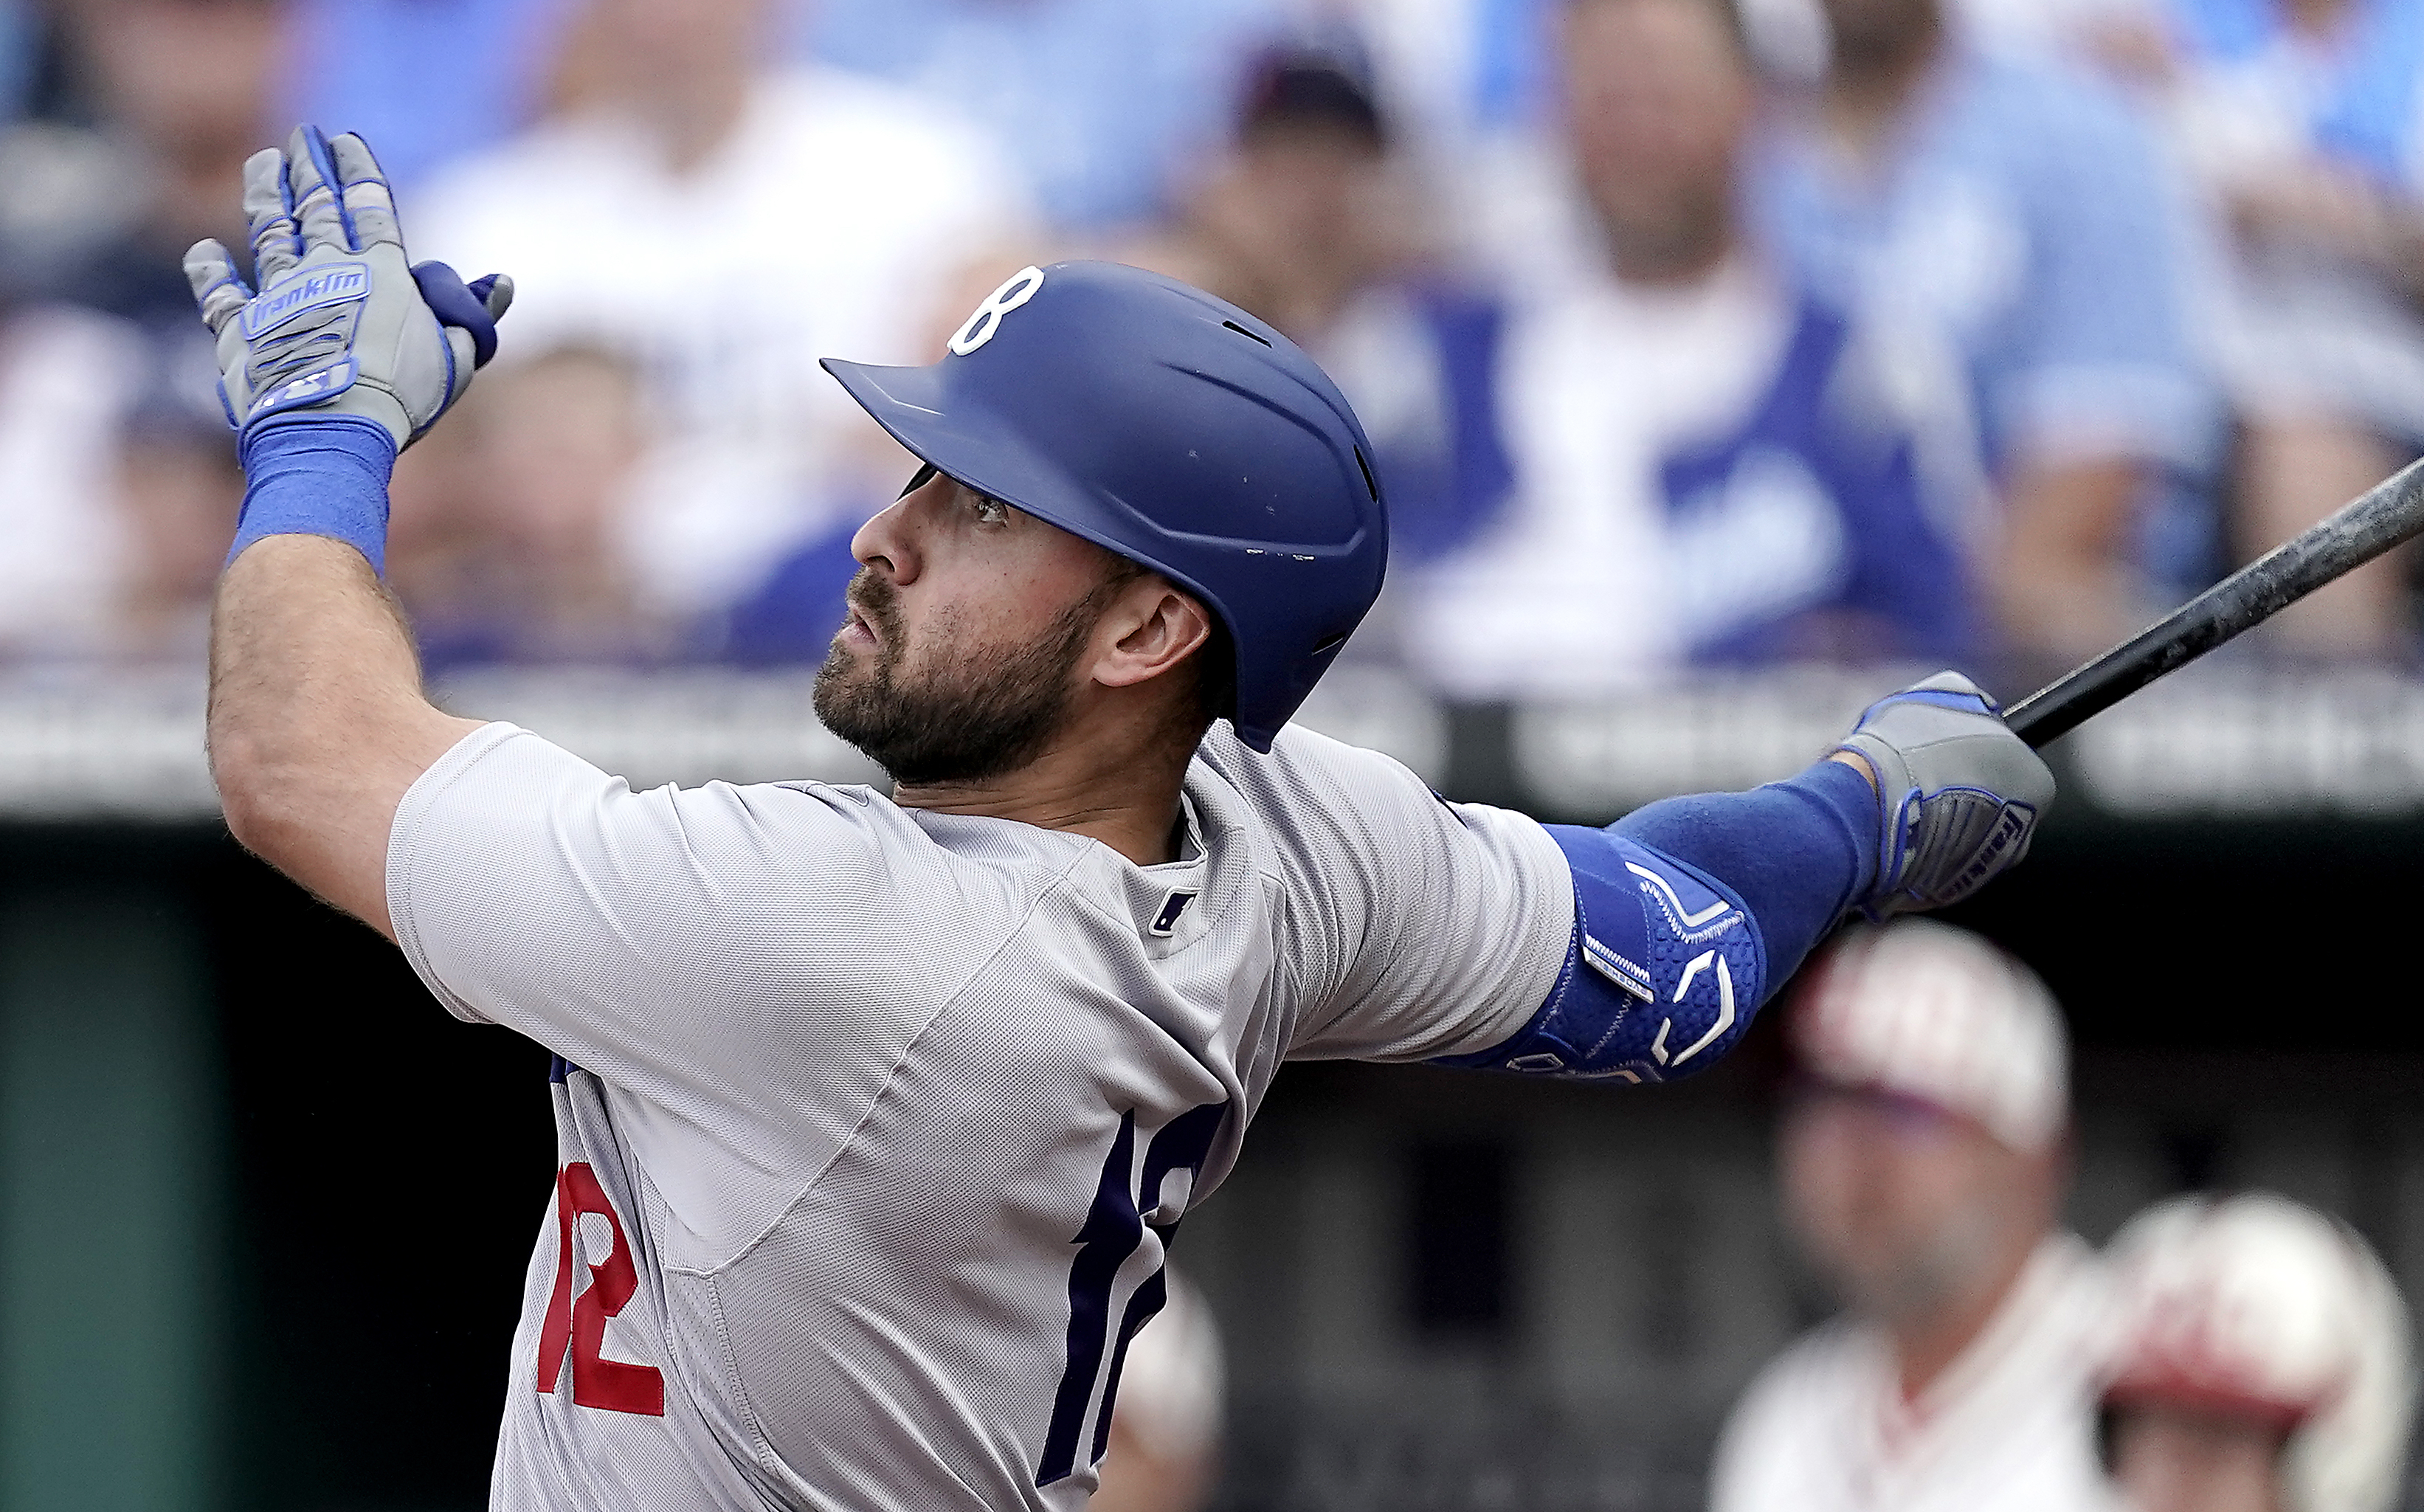 Joey Gallo finding himself with Dodgers after Yankees trade